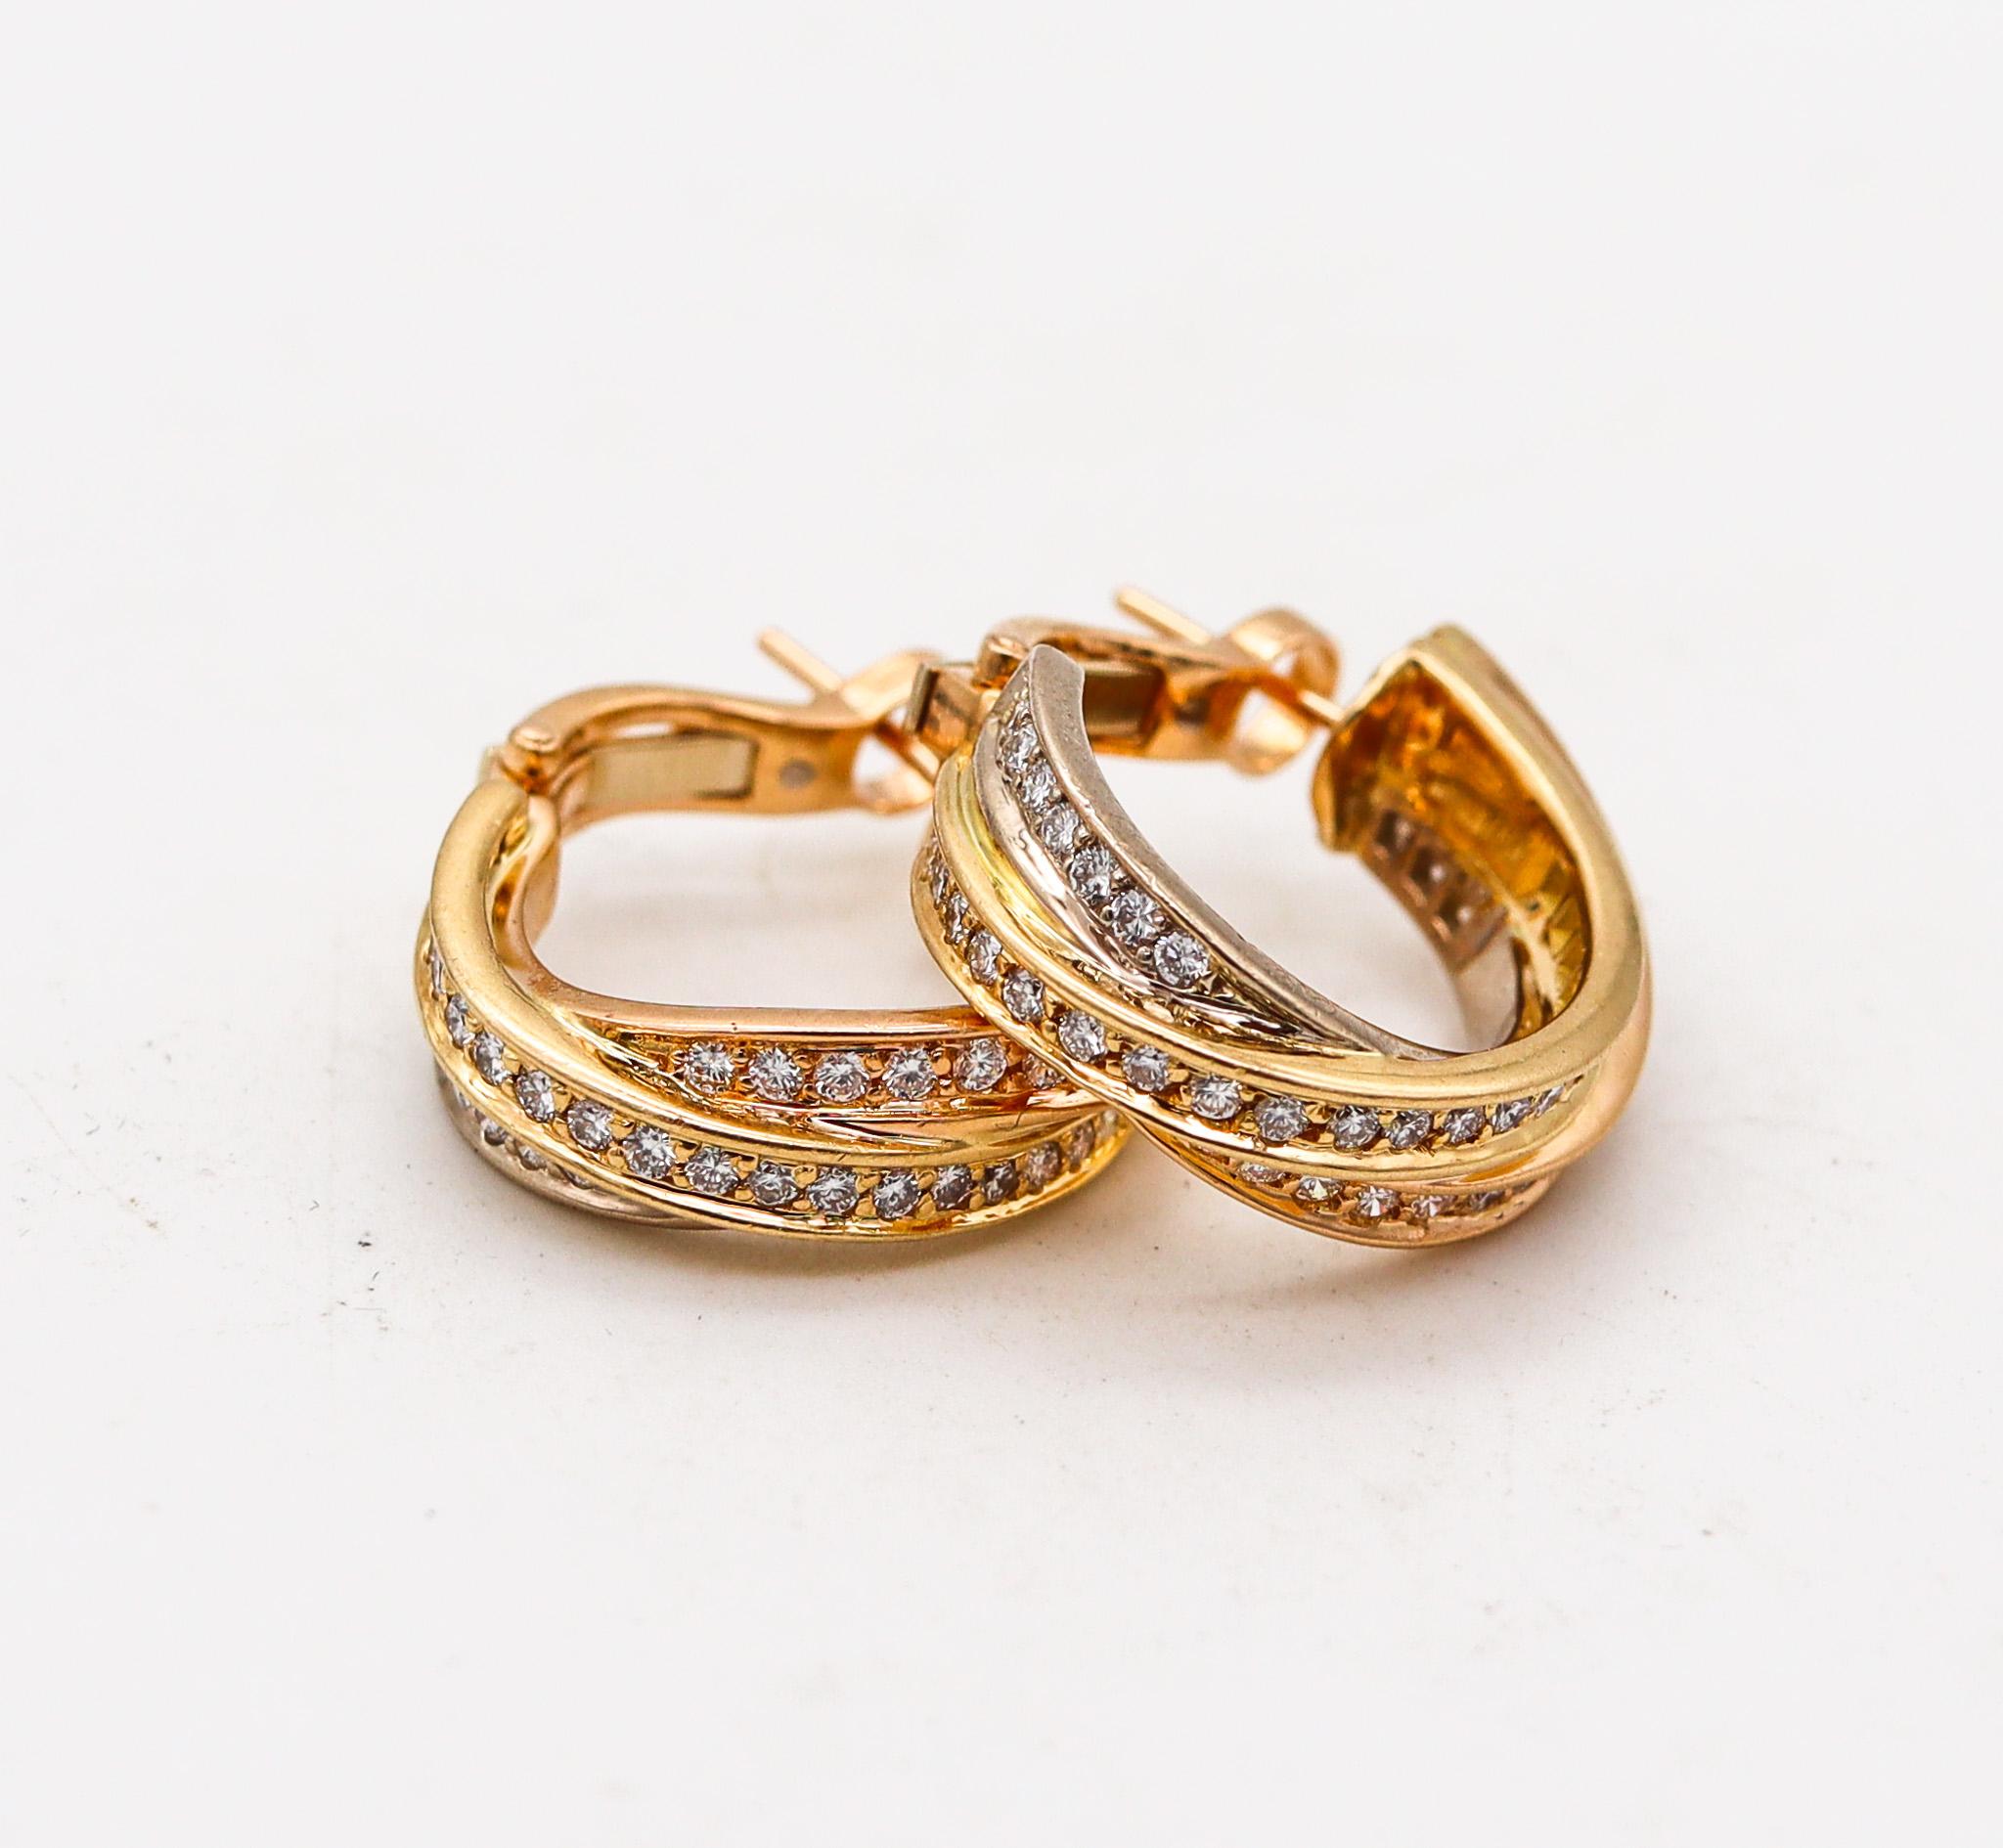 Modern Cartier Paris Trinity Earrings In 18Kt Yellow Gold With 2.07 Ctw In Diamonds For Sale